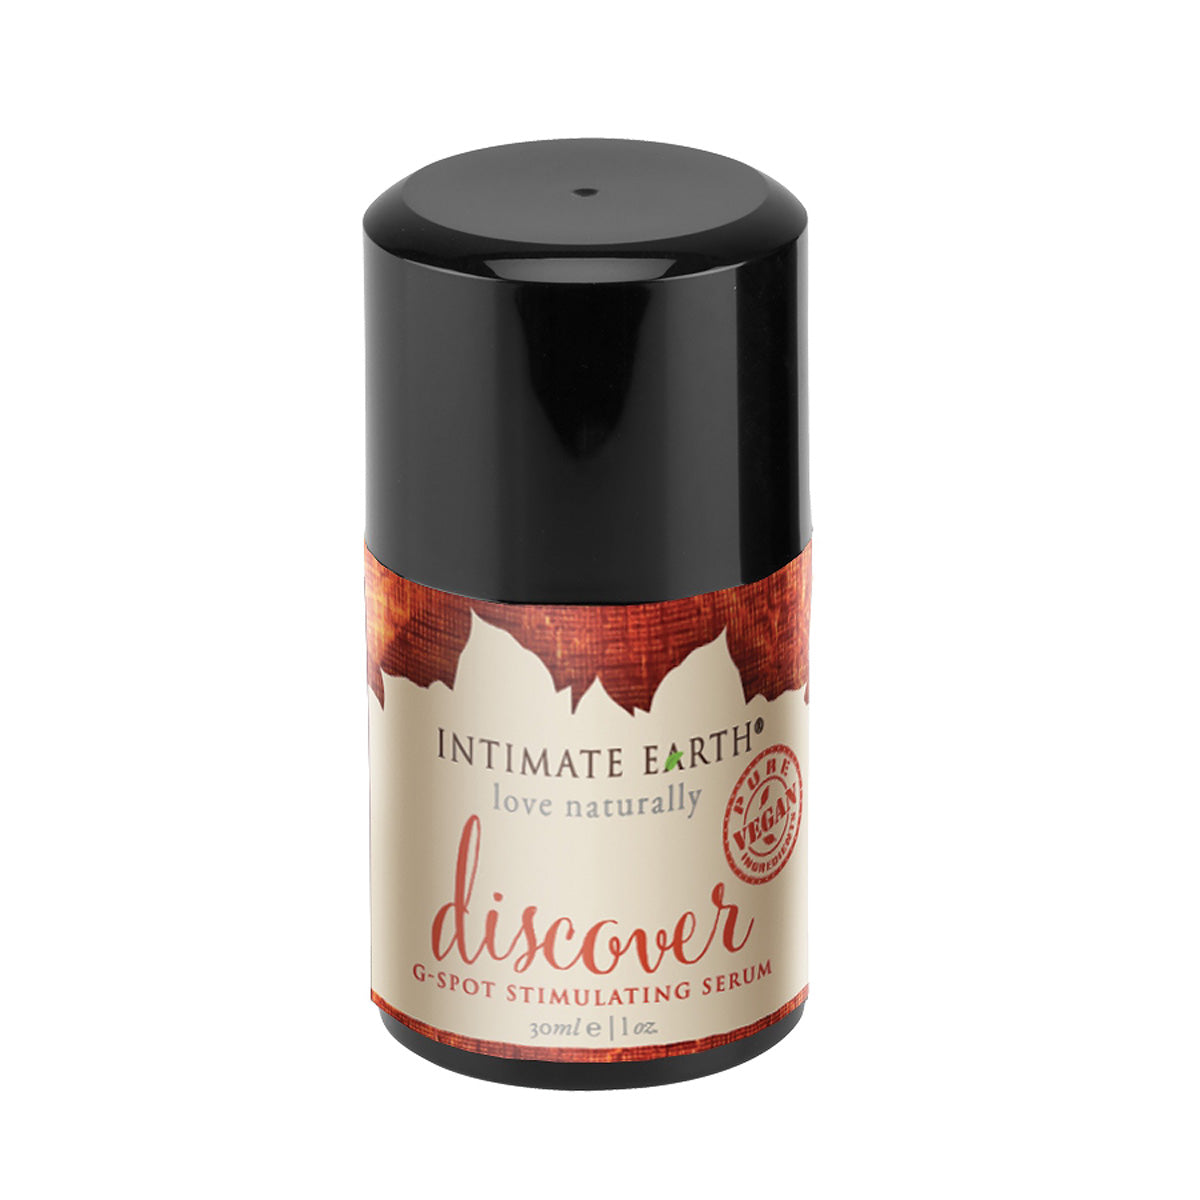 Intimate Earth Discover G-Spot Serum 1 oz. [84603]